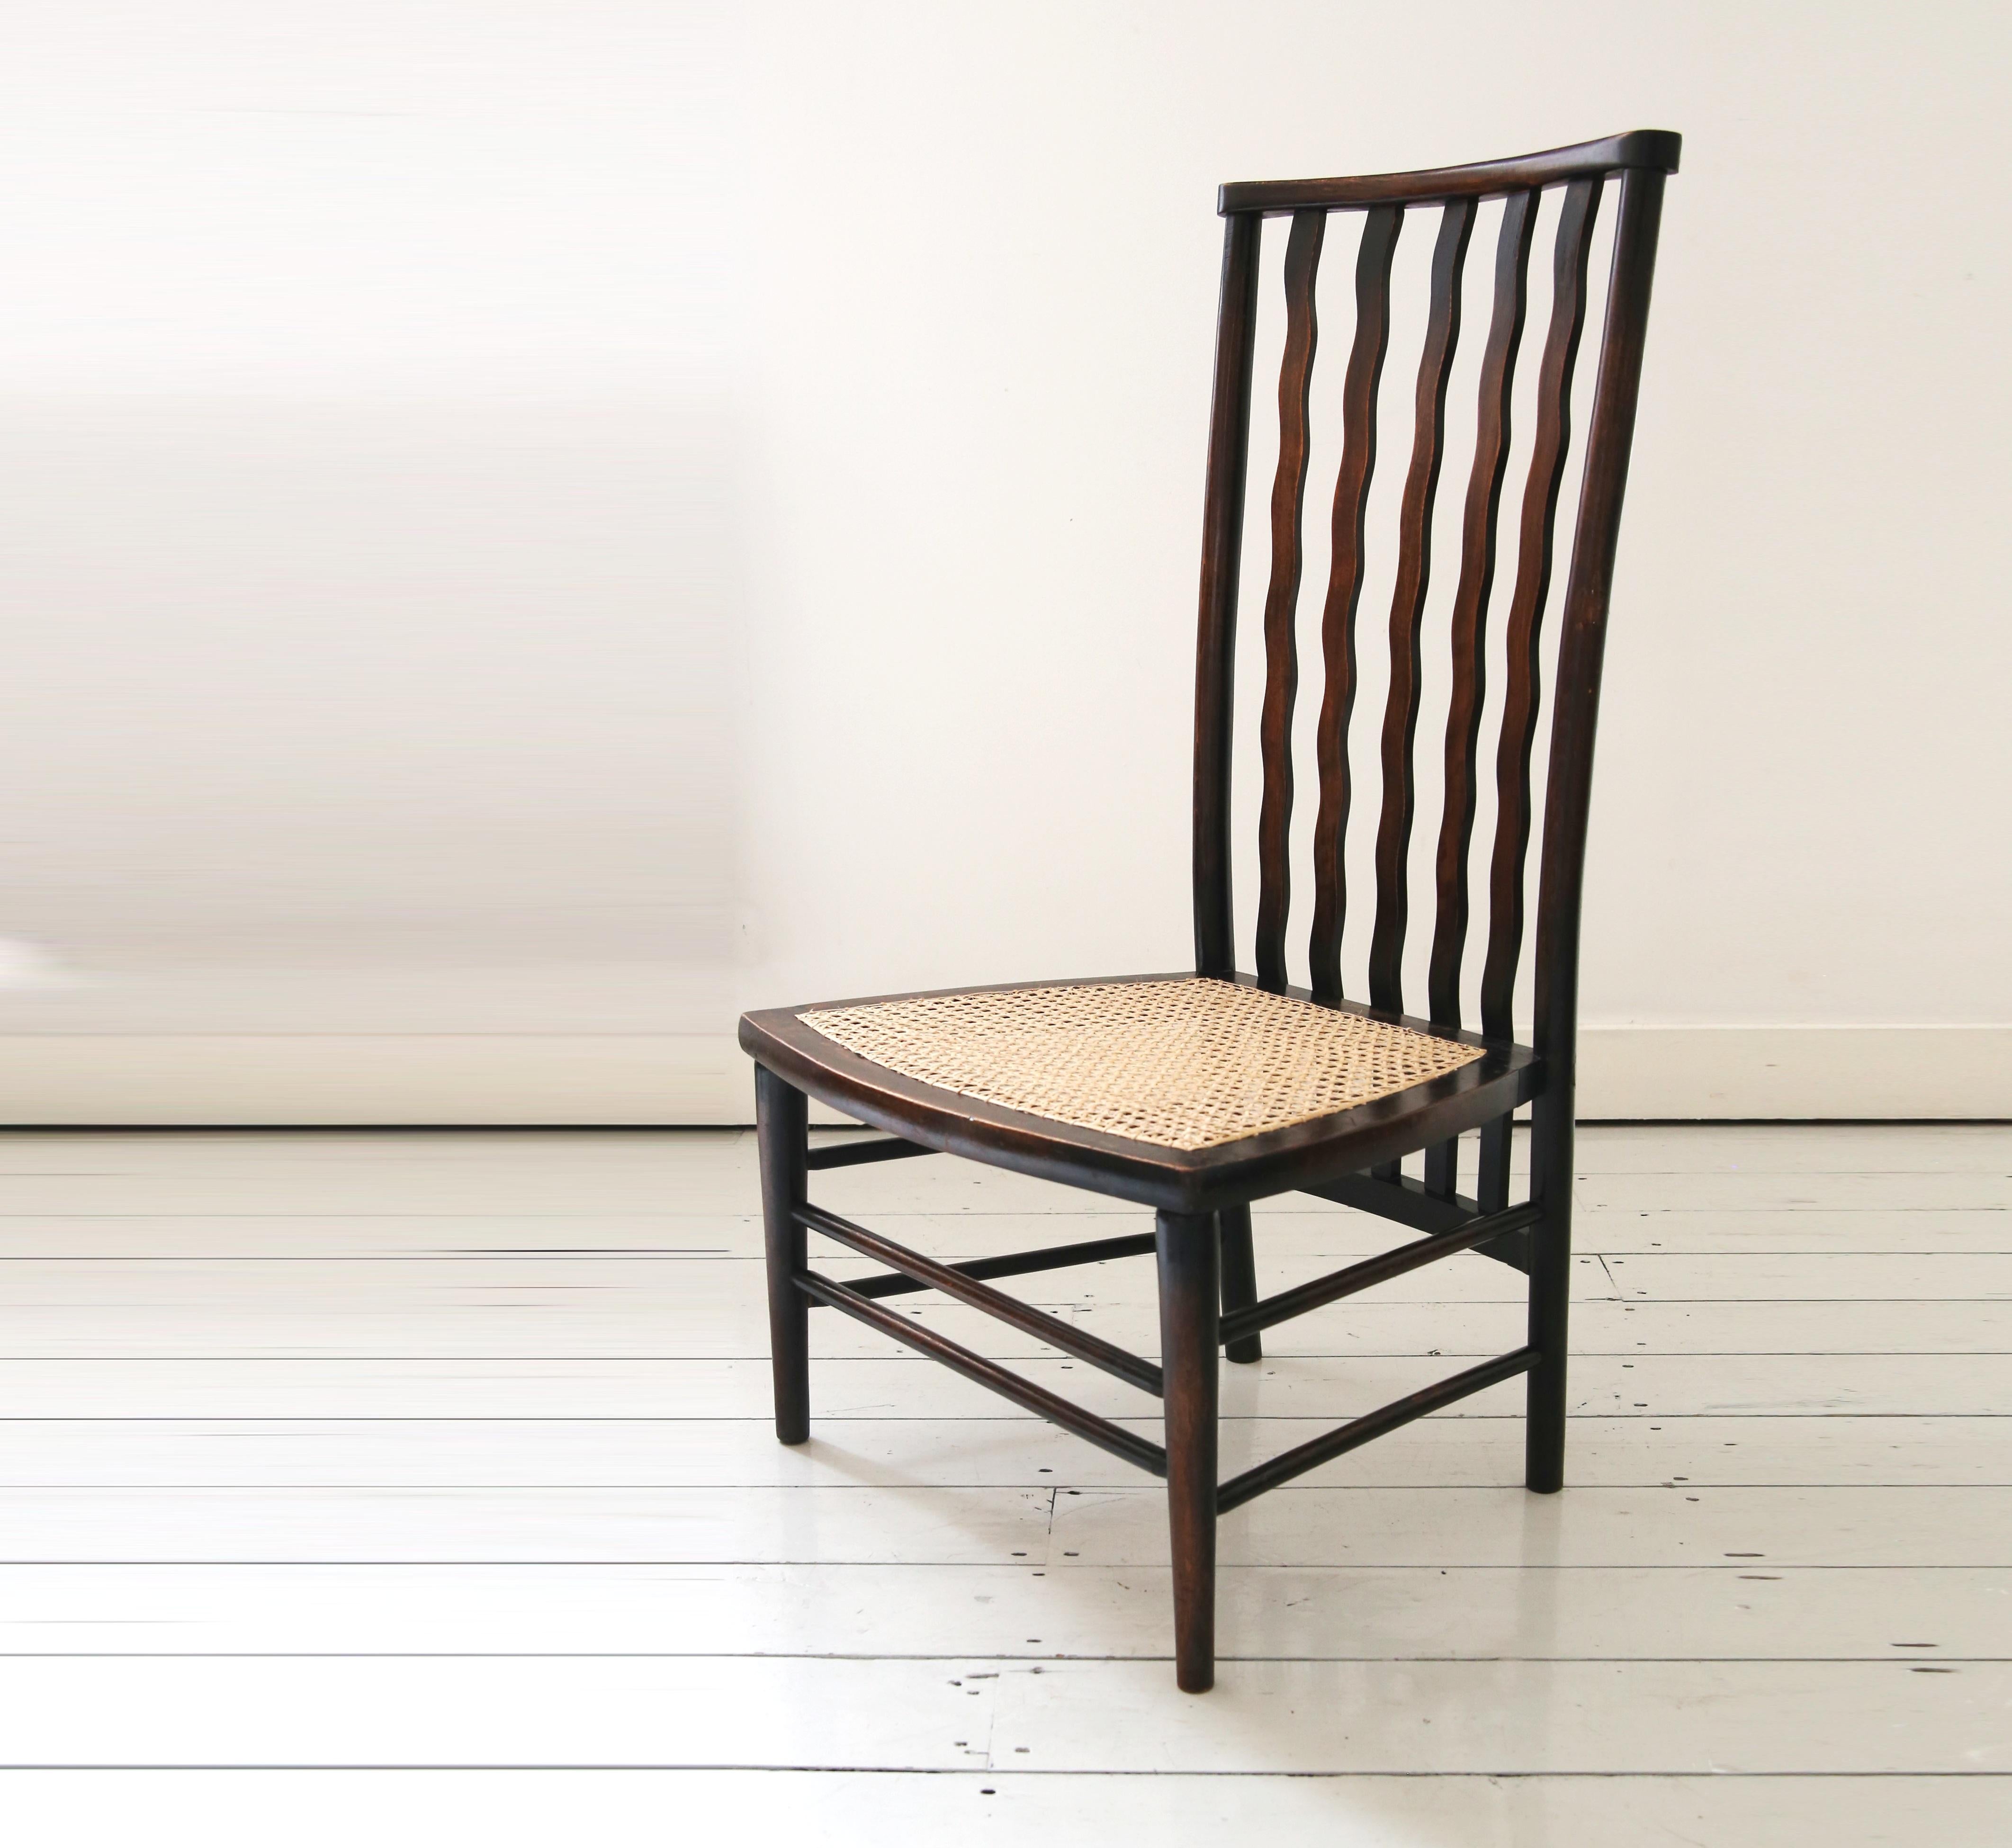 A lovely Victorian Morris & Co Arts & Crafts low chair for Liberty London, made between circa 1890 - 1920.

Featuring an elegant, elongated high back after C.R. Mackintosh's designs and fitted with a new woven cane seat, the chair's standout feature